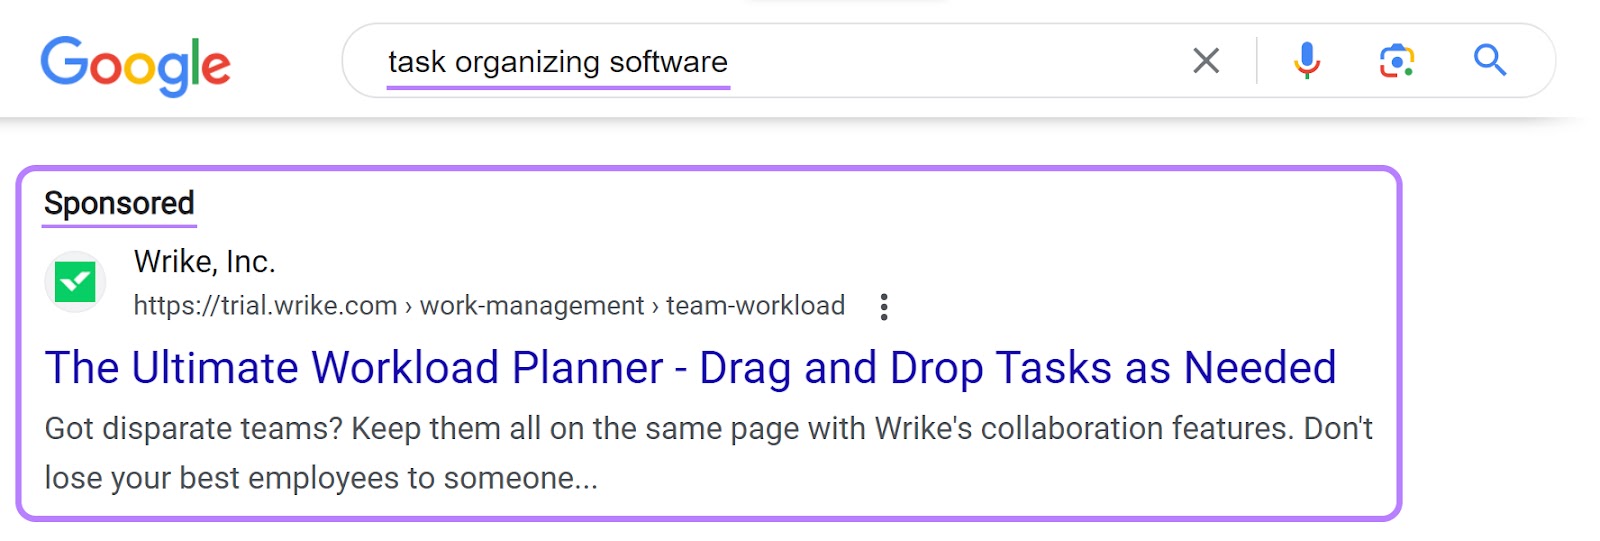 Wrike's search ad for “task ،izing software” query